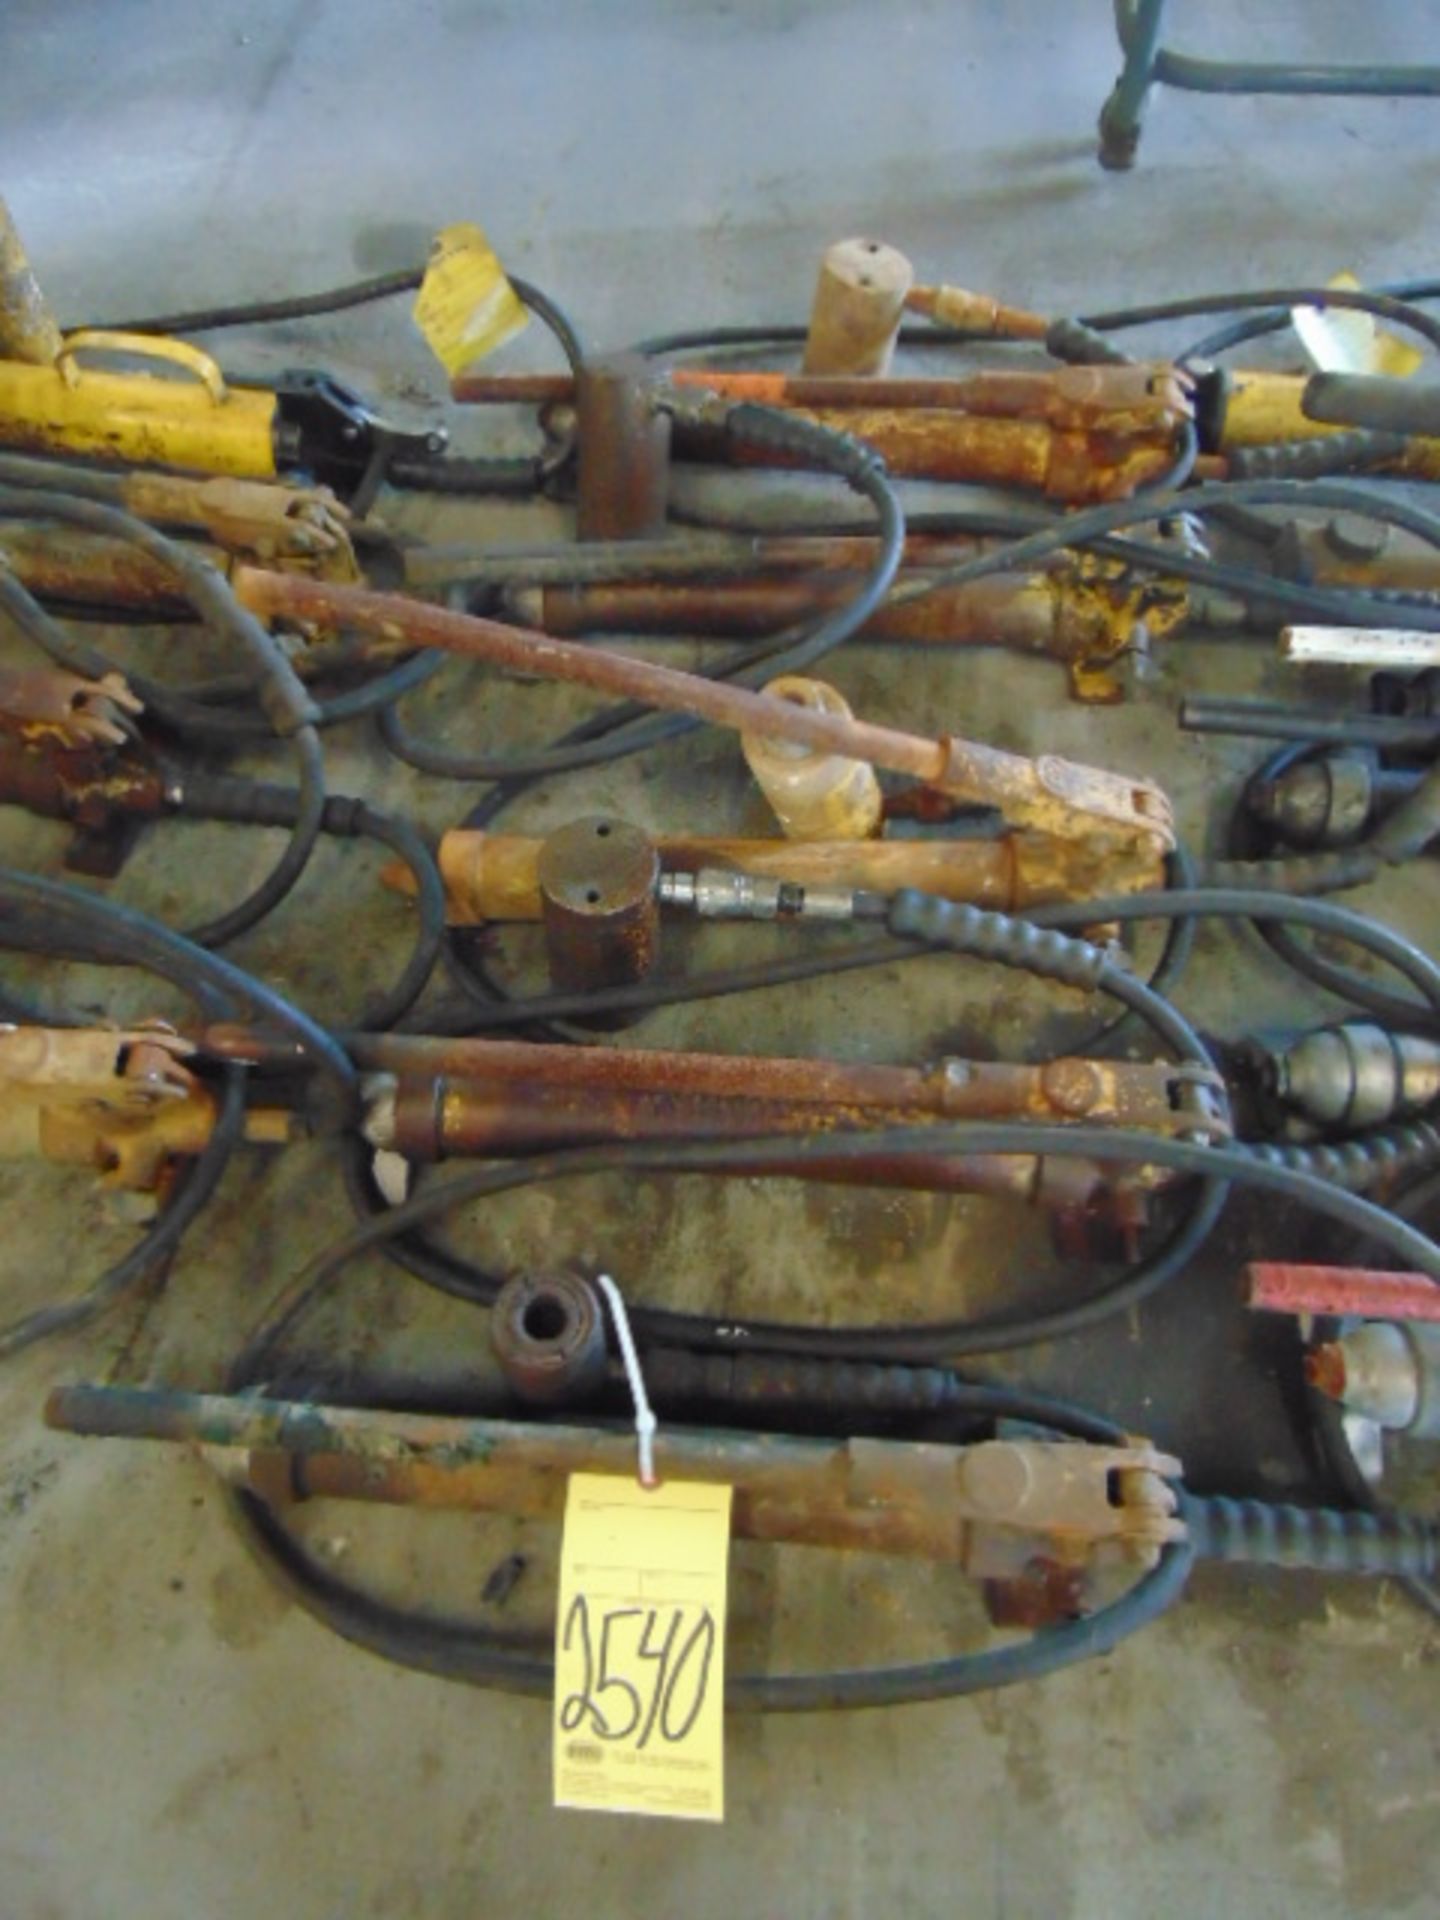 LOT OF HAND PUMPS (5), ENERPAC